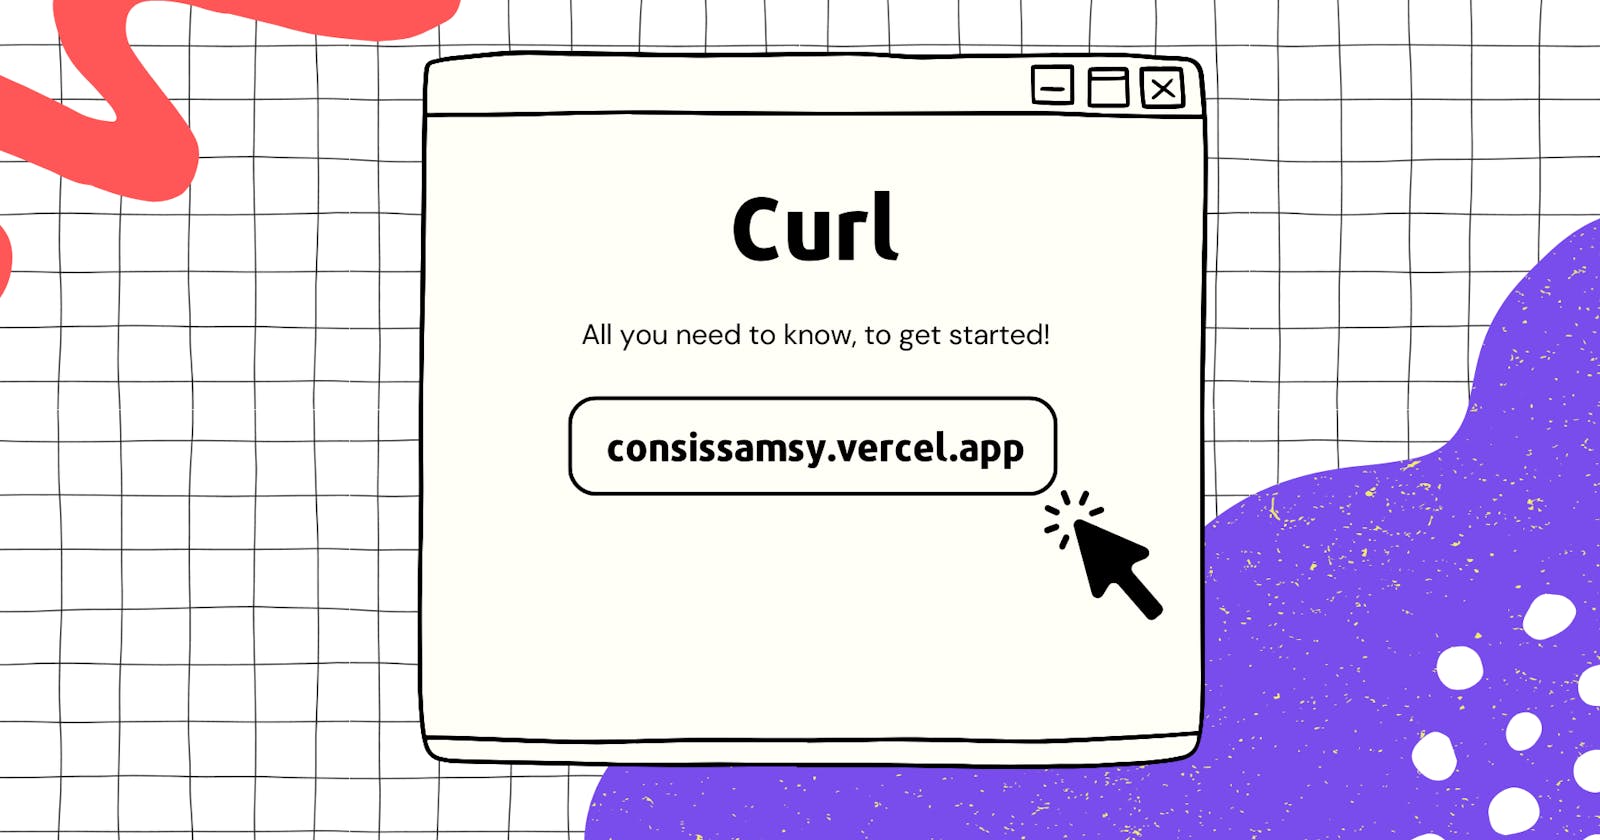 Curl - All you need to know, to get started!